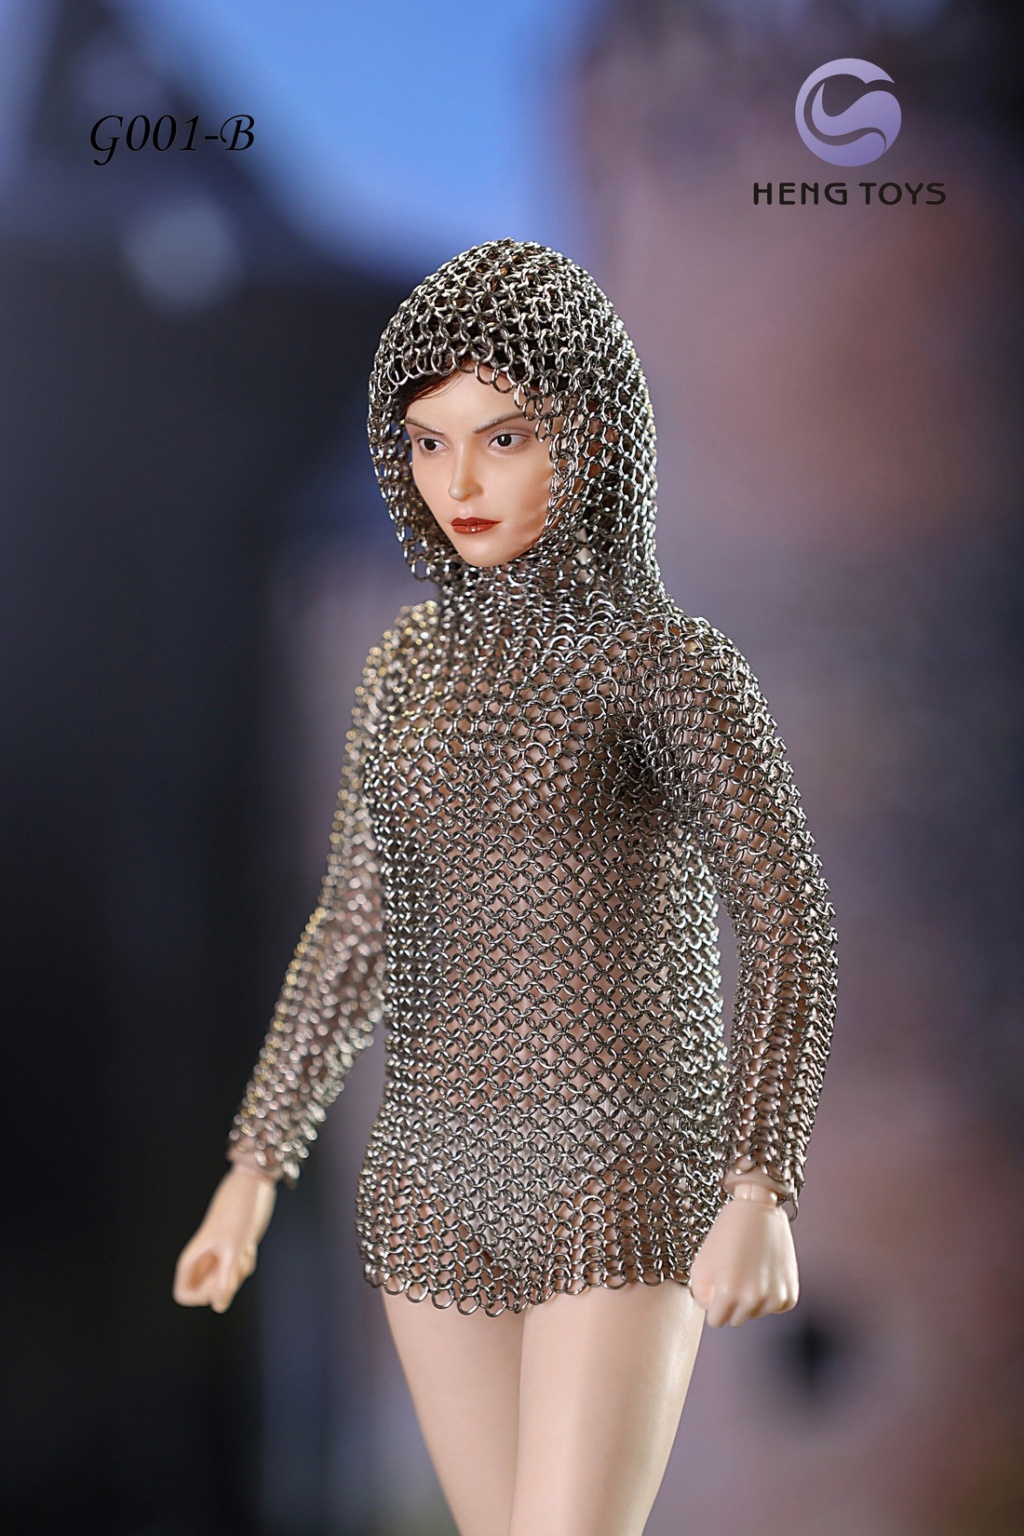 Armor - NEW PRODUCT: HENG TOYS: 1/6 stainless steel chain mail (diameter 3.8mm) [male/female] 802eb110